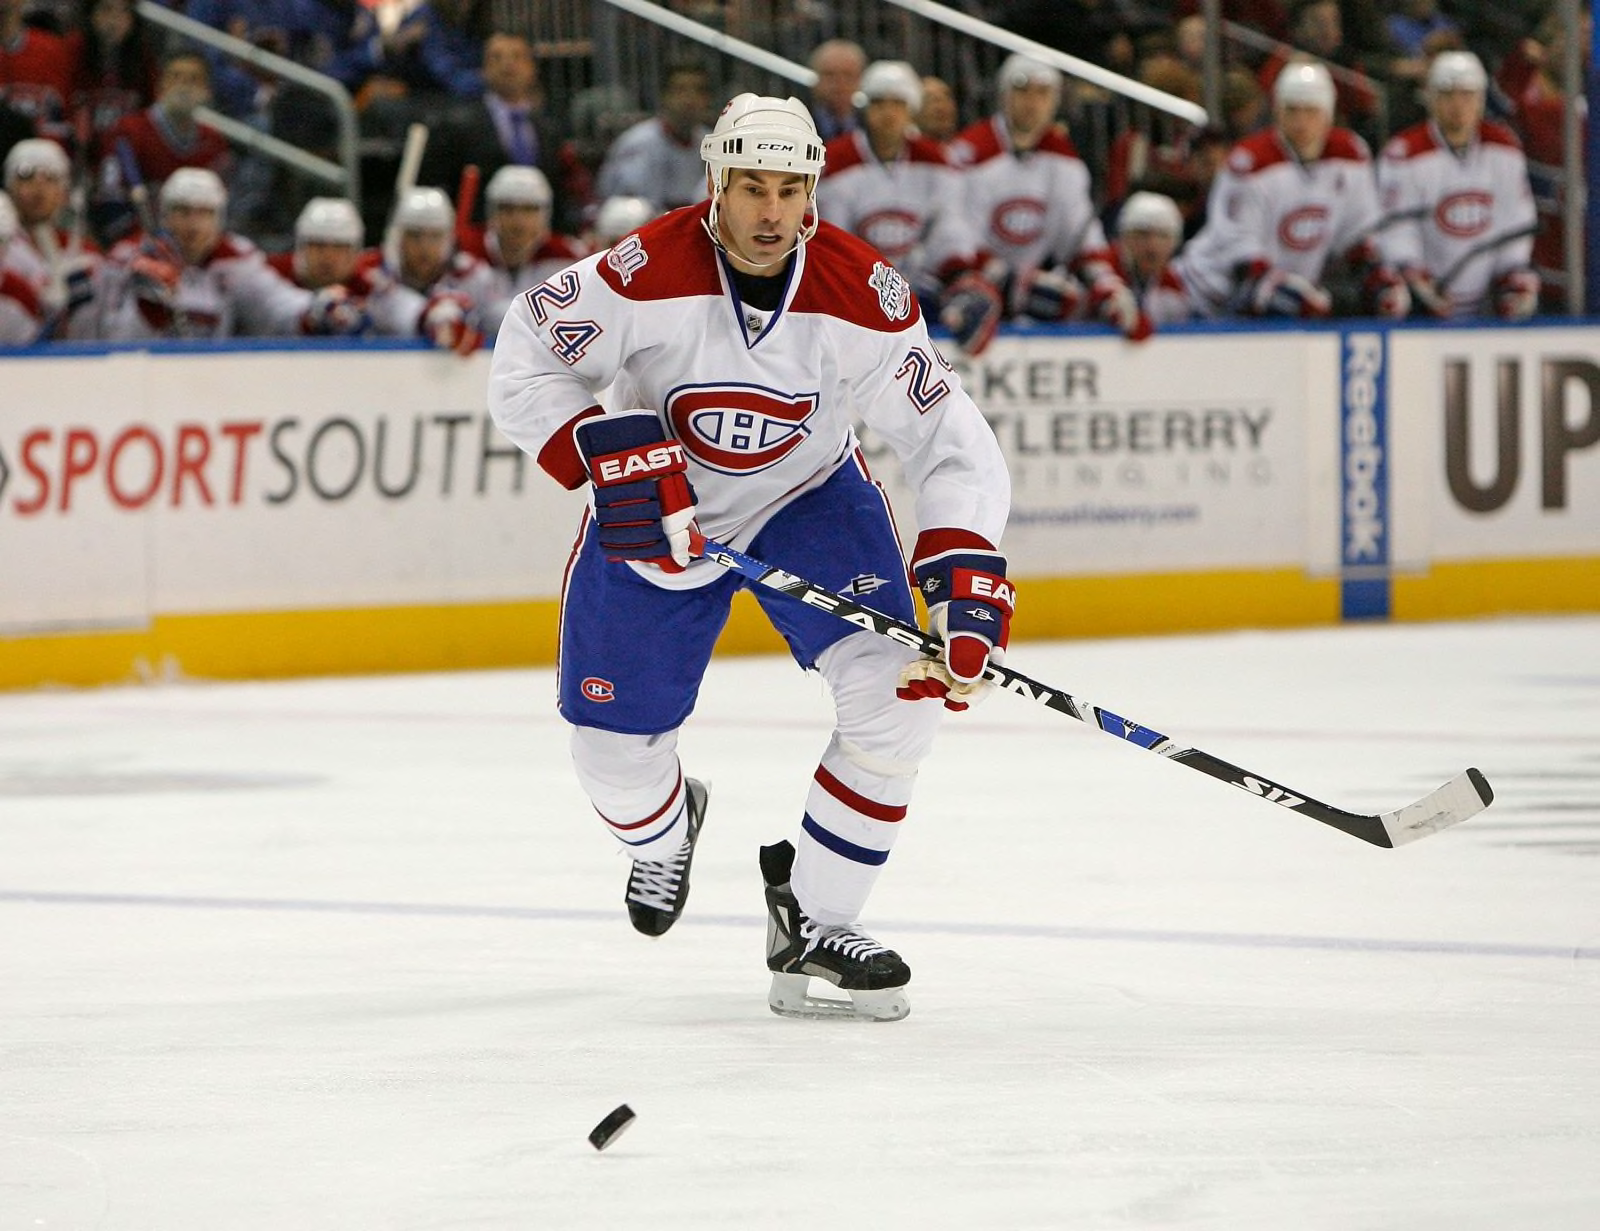 Canadiens' draft prospects: Defenceman Schneider strong in both ends